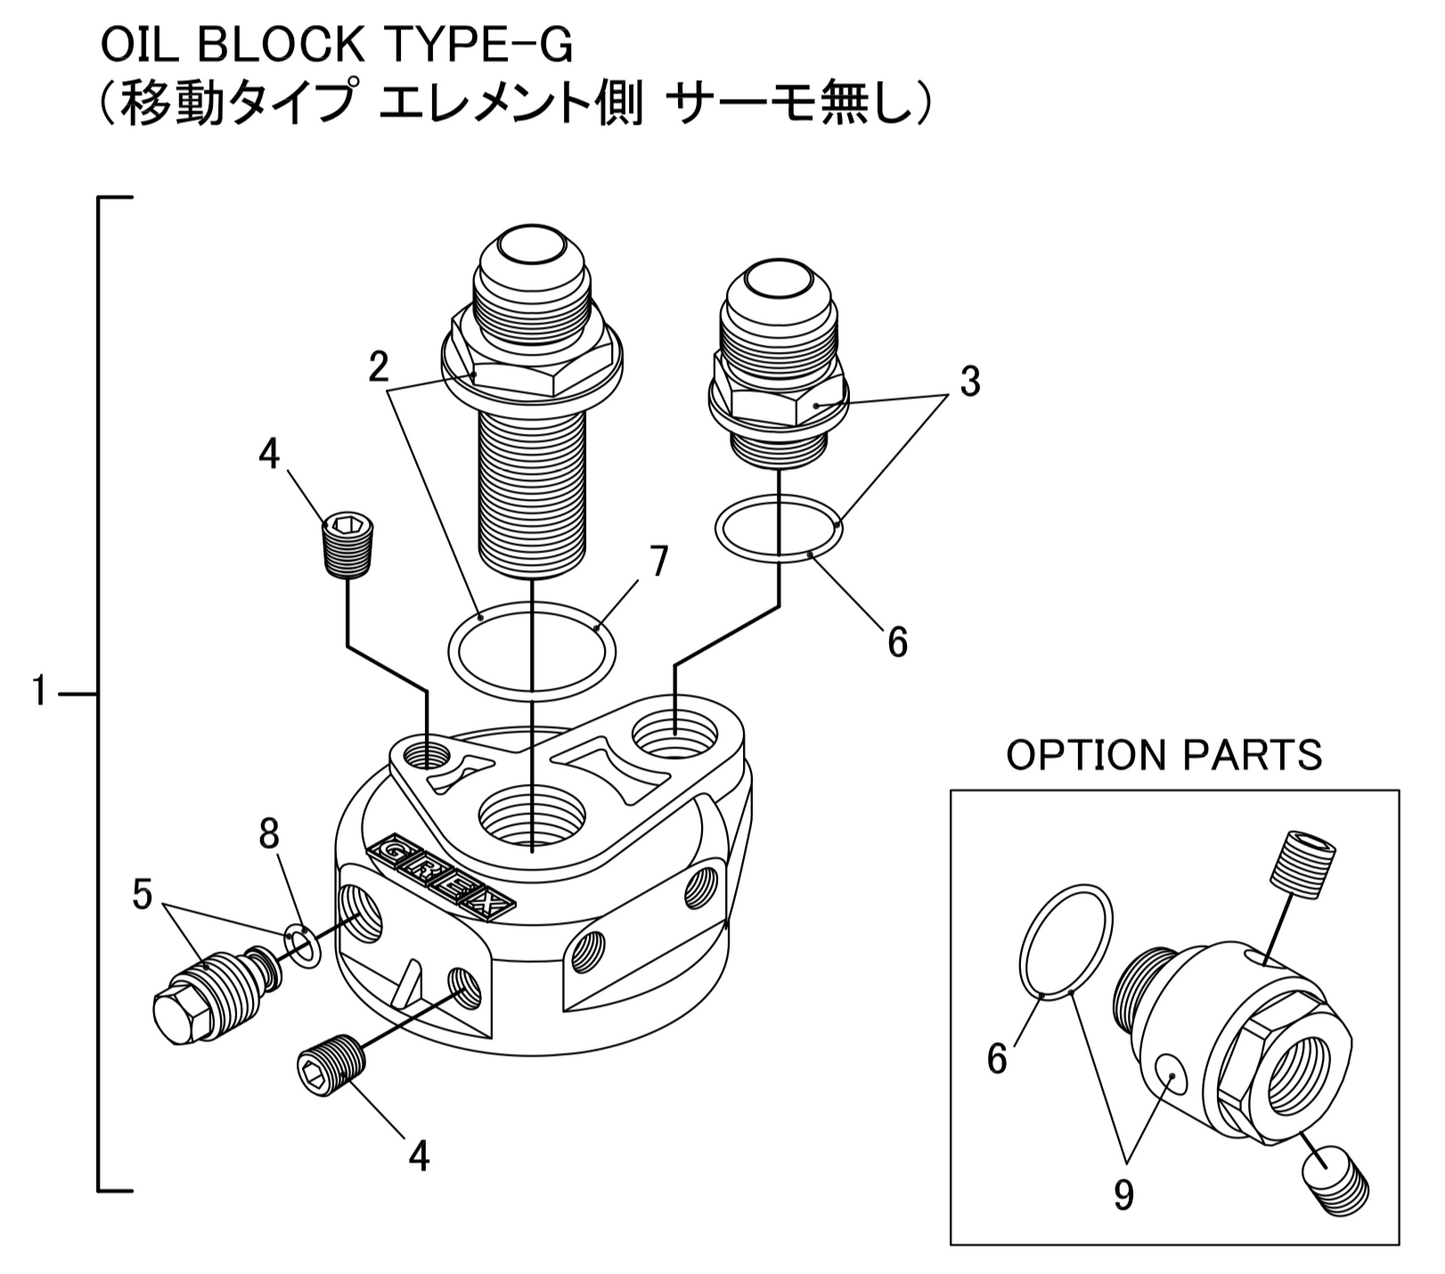 GReddy TRUST Japan OIL BLOCK TYPE-G (MU MOVEMENT TYPE ELEMENT SIDE THERMO) FOR 12401100